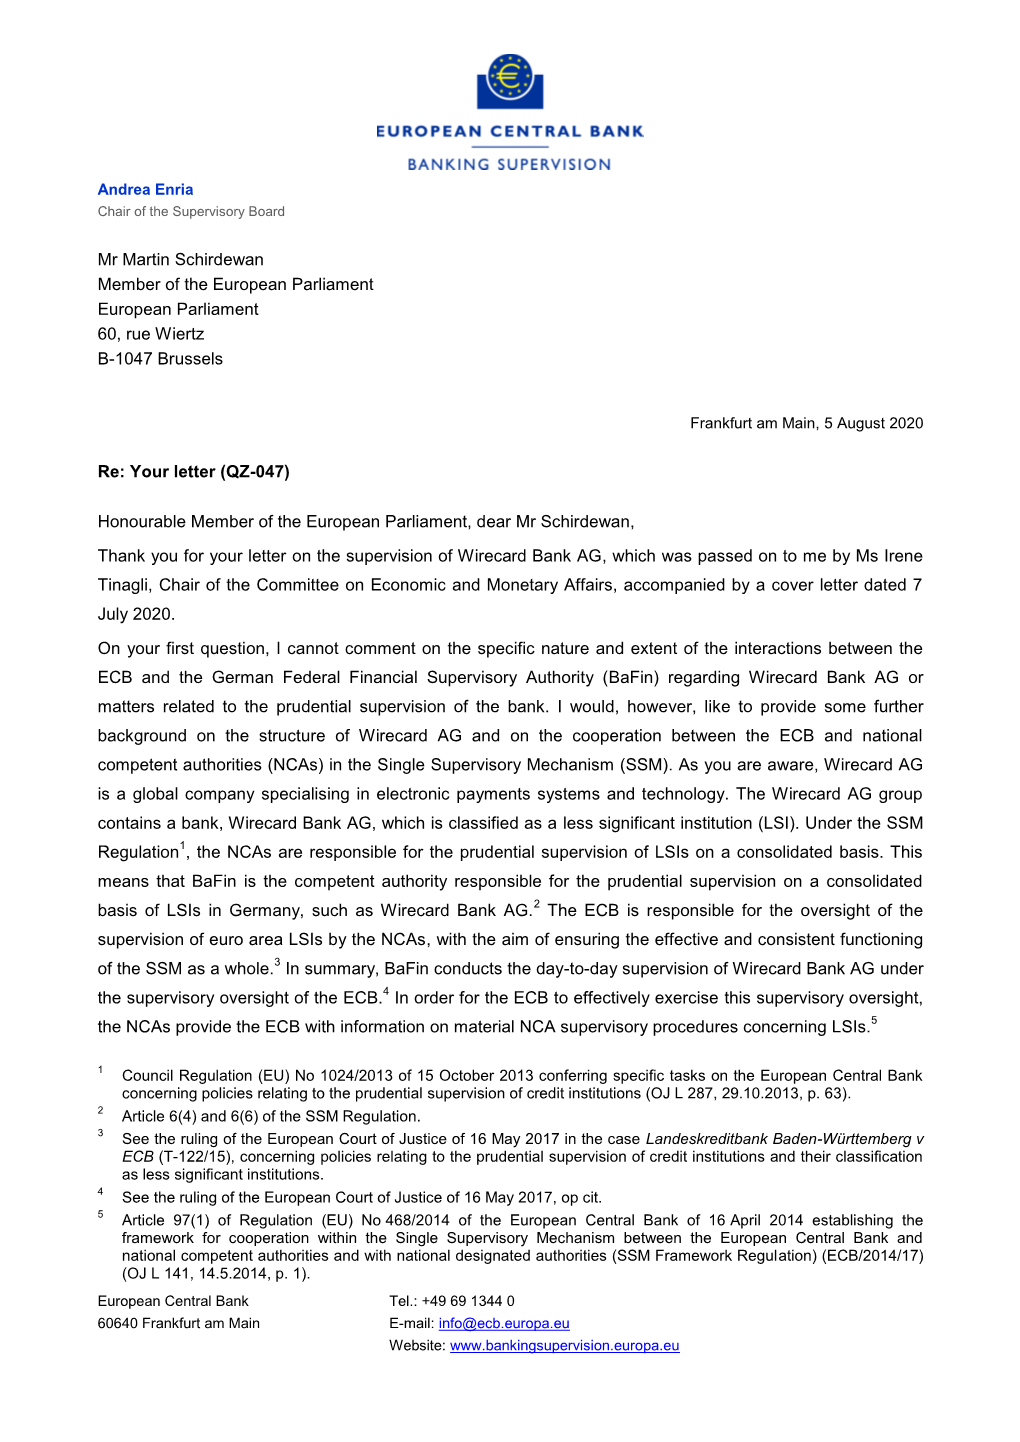 Letter from Andrea Enria, Chair of the Supervisory Board, to Mr